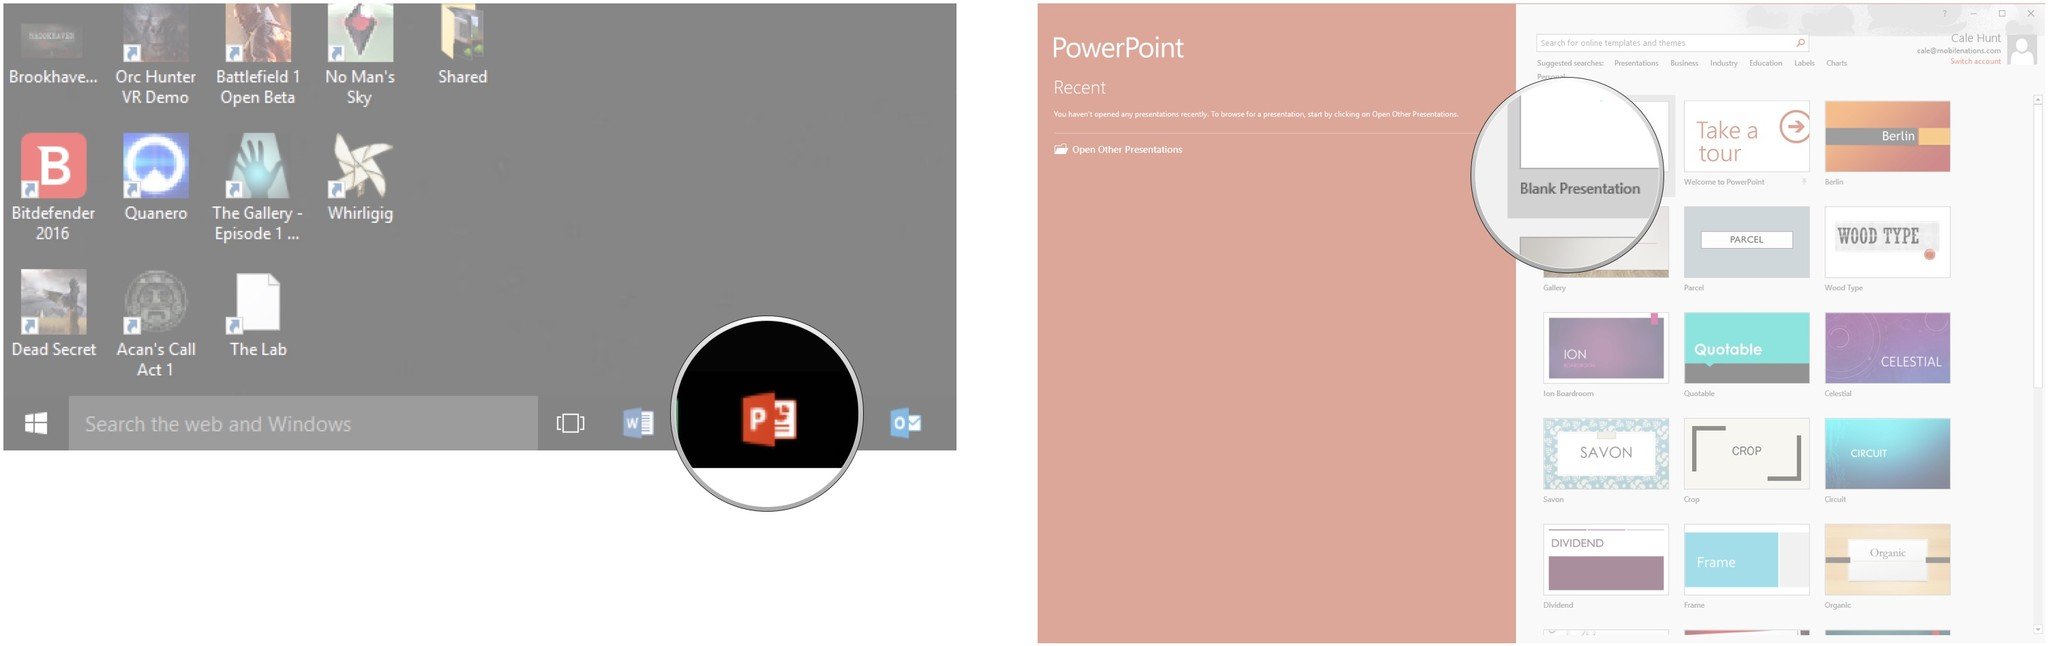 Launch PowerPoint. Double-click a presentation template.